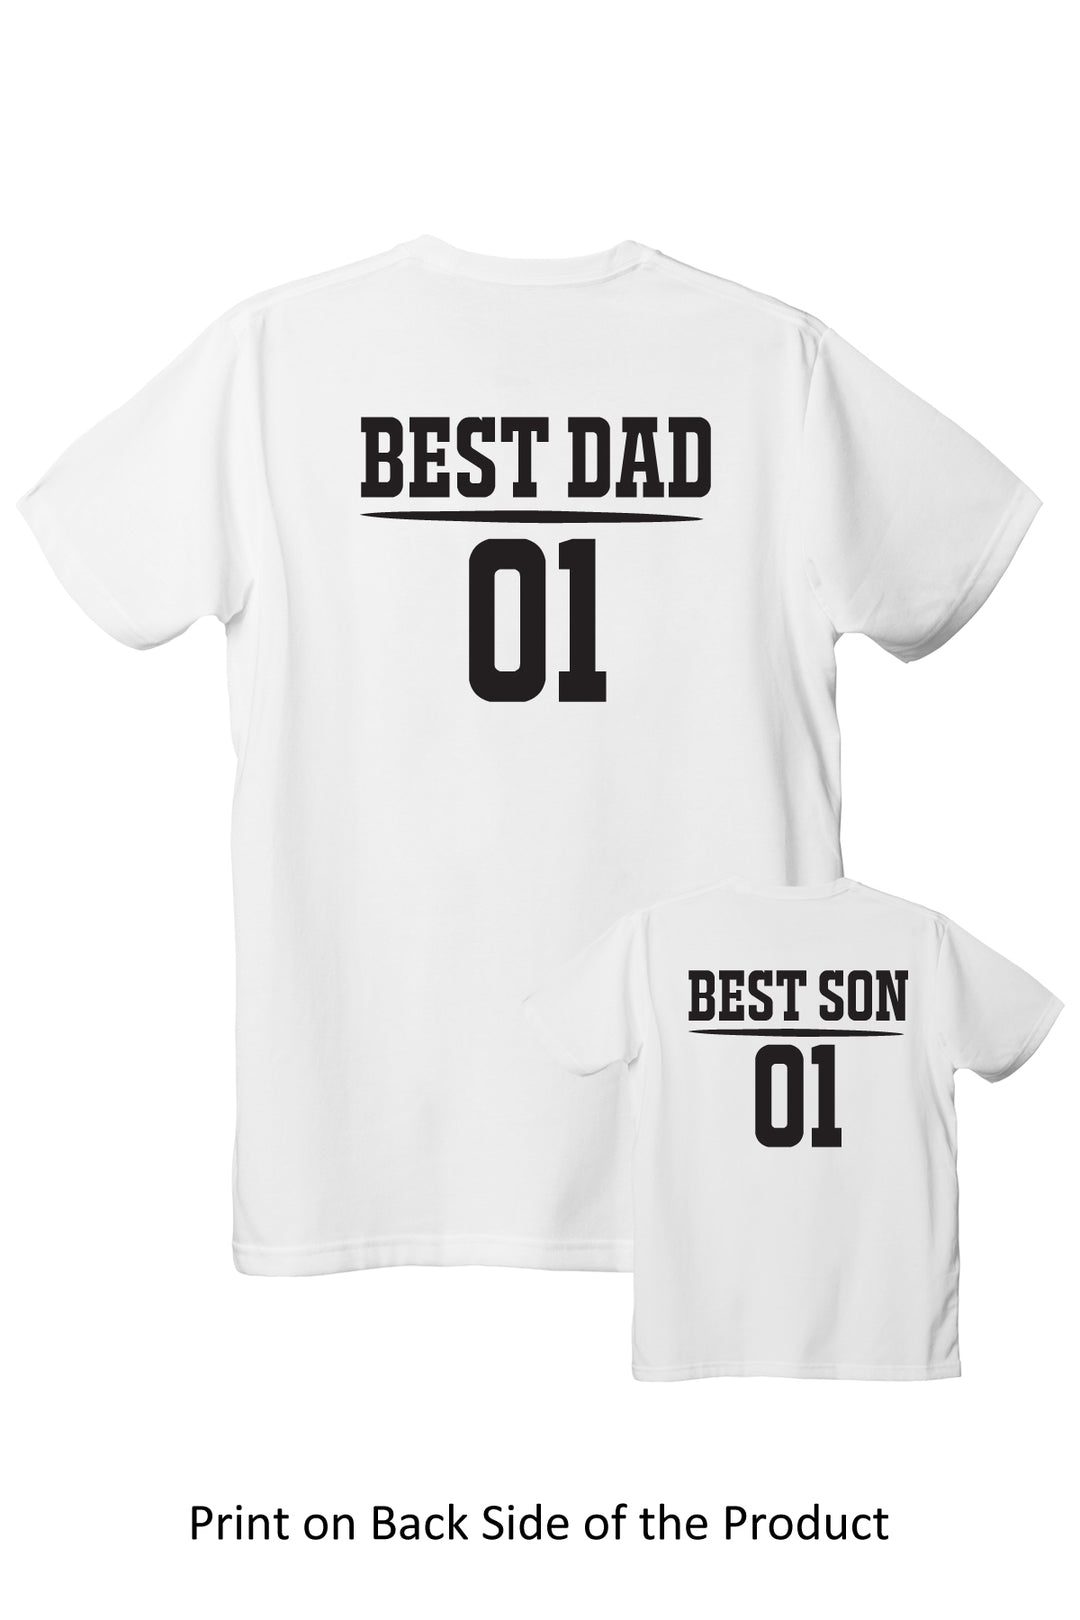 Best Dad and Best Son